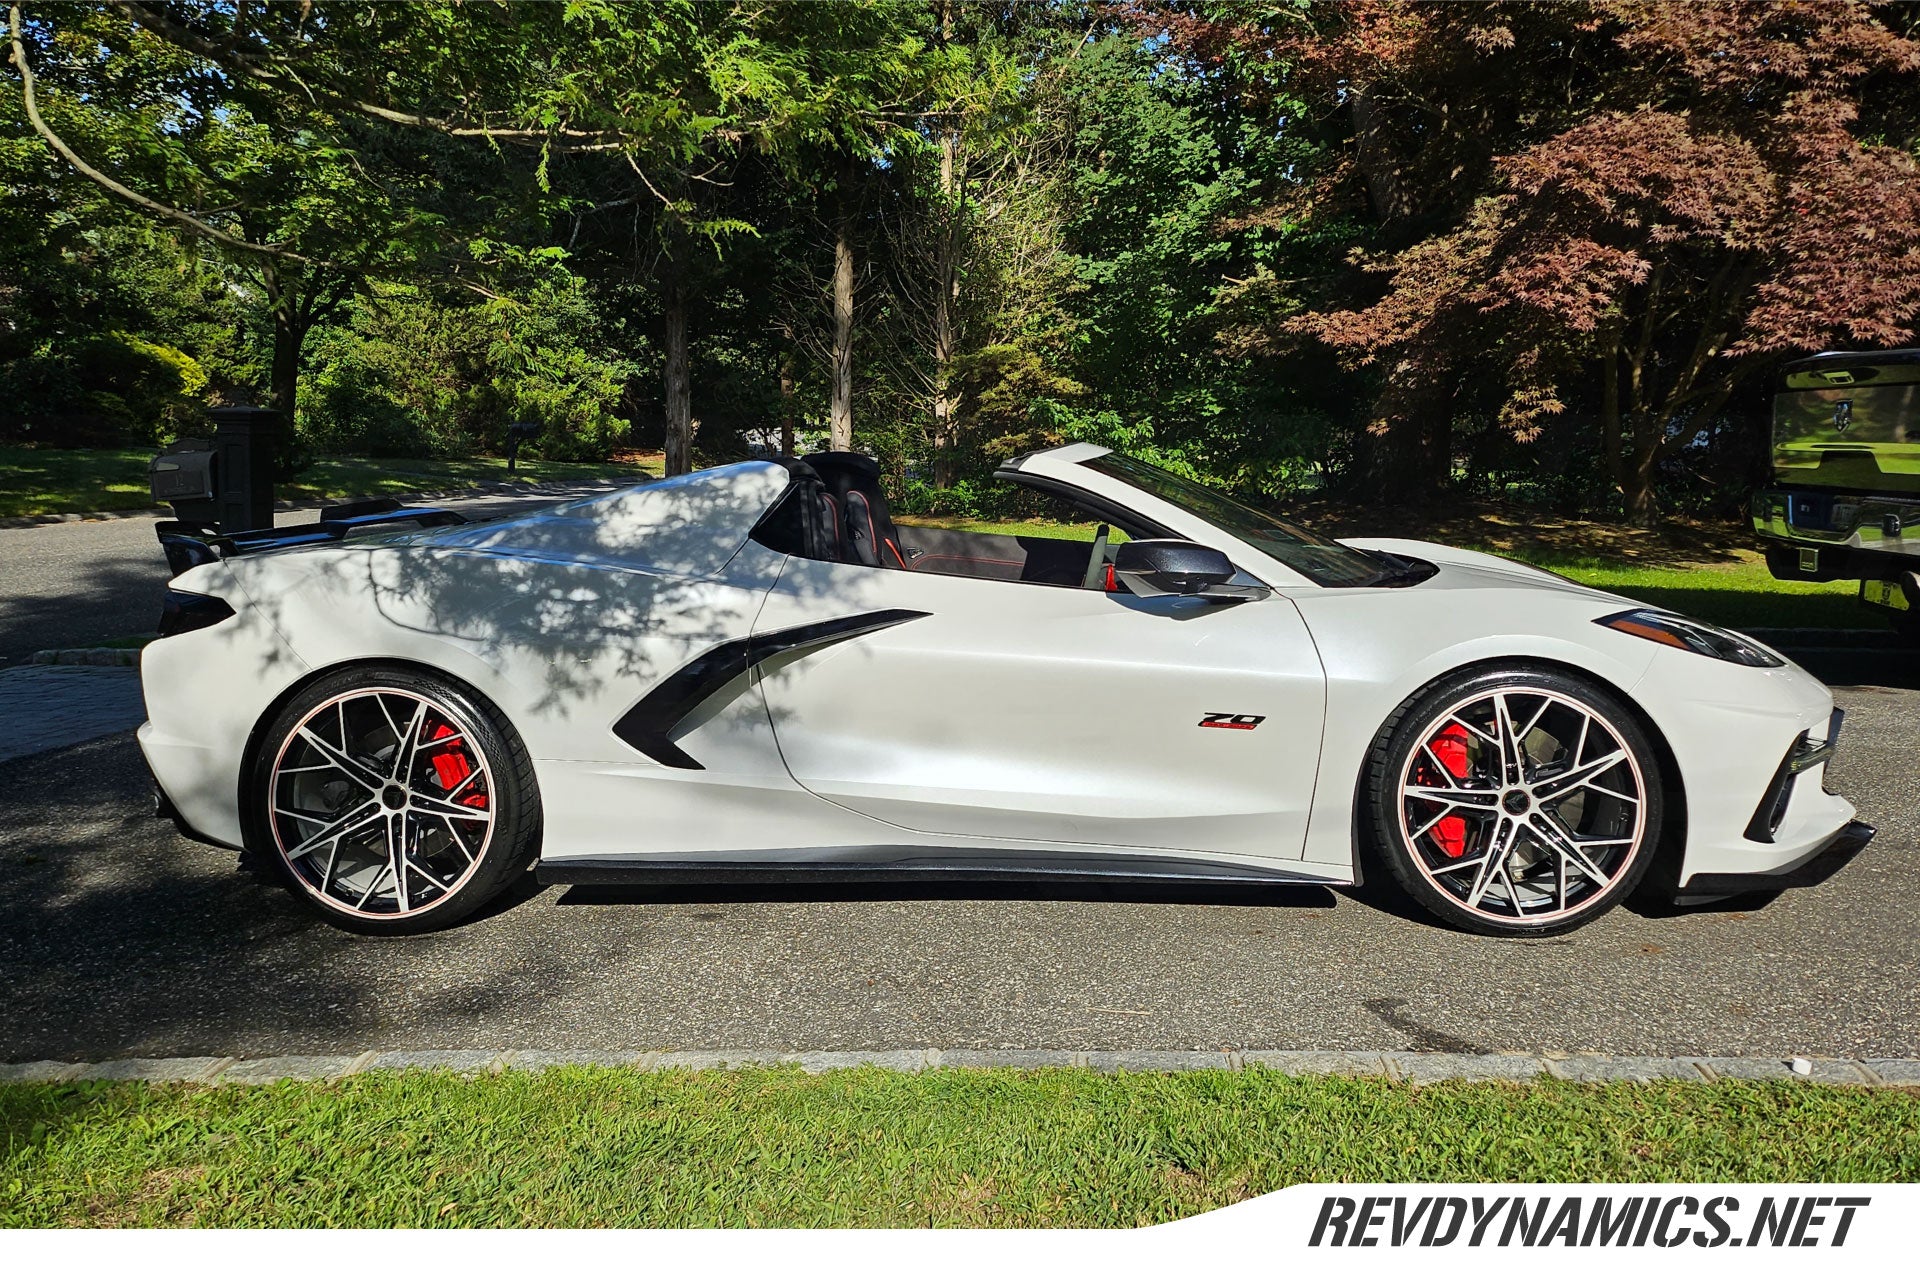 70th Anniversary Corvette C8 with custom wheels in arctic white, carbon flash, and torch red pinstripe